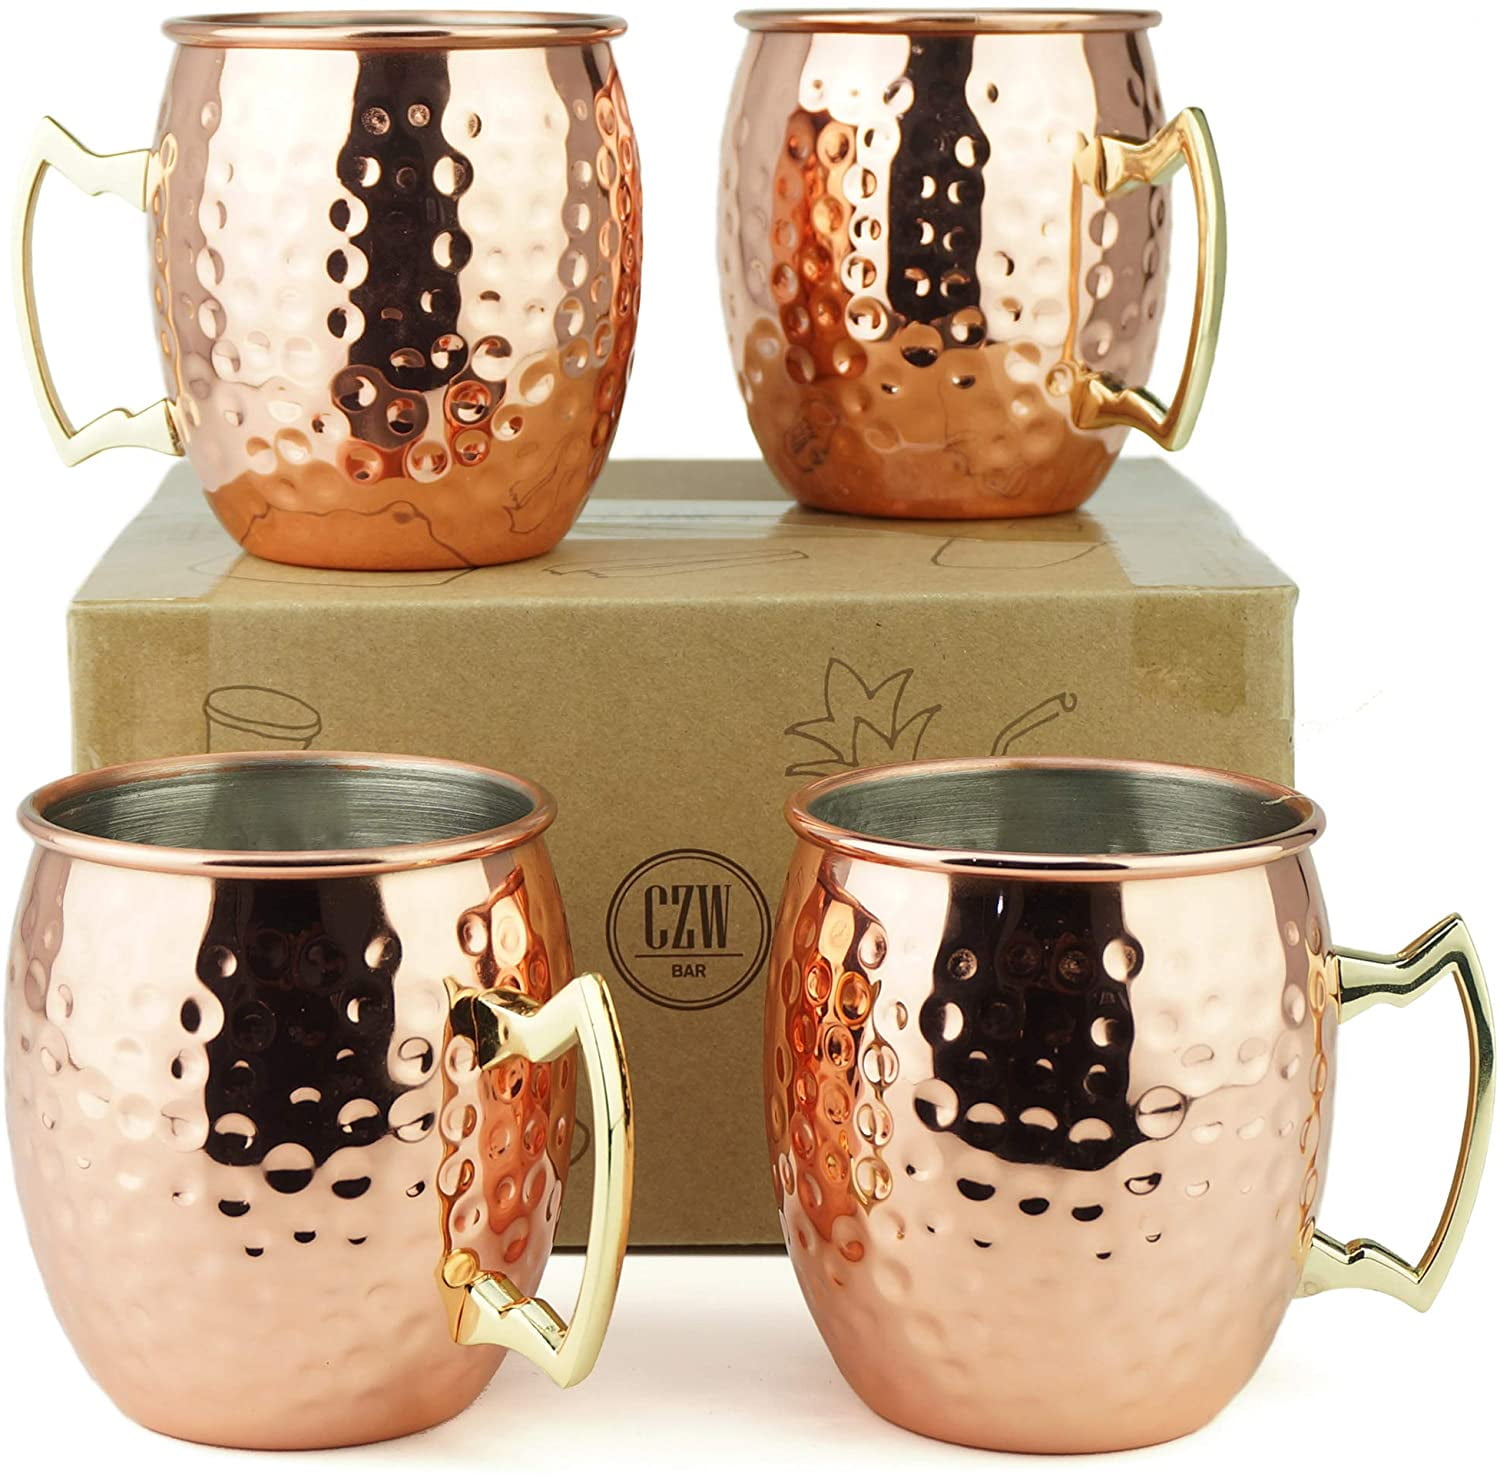 Hammered Copper Moscow Mule Mug Handmade of 100% Pure Copper Set Of-4 Size-16 Ounce Without Lacquered. Brass Handle Solid Copper Moscow Mule Mug / Cup 